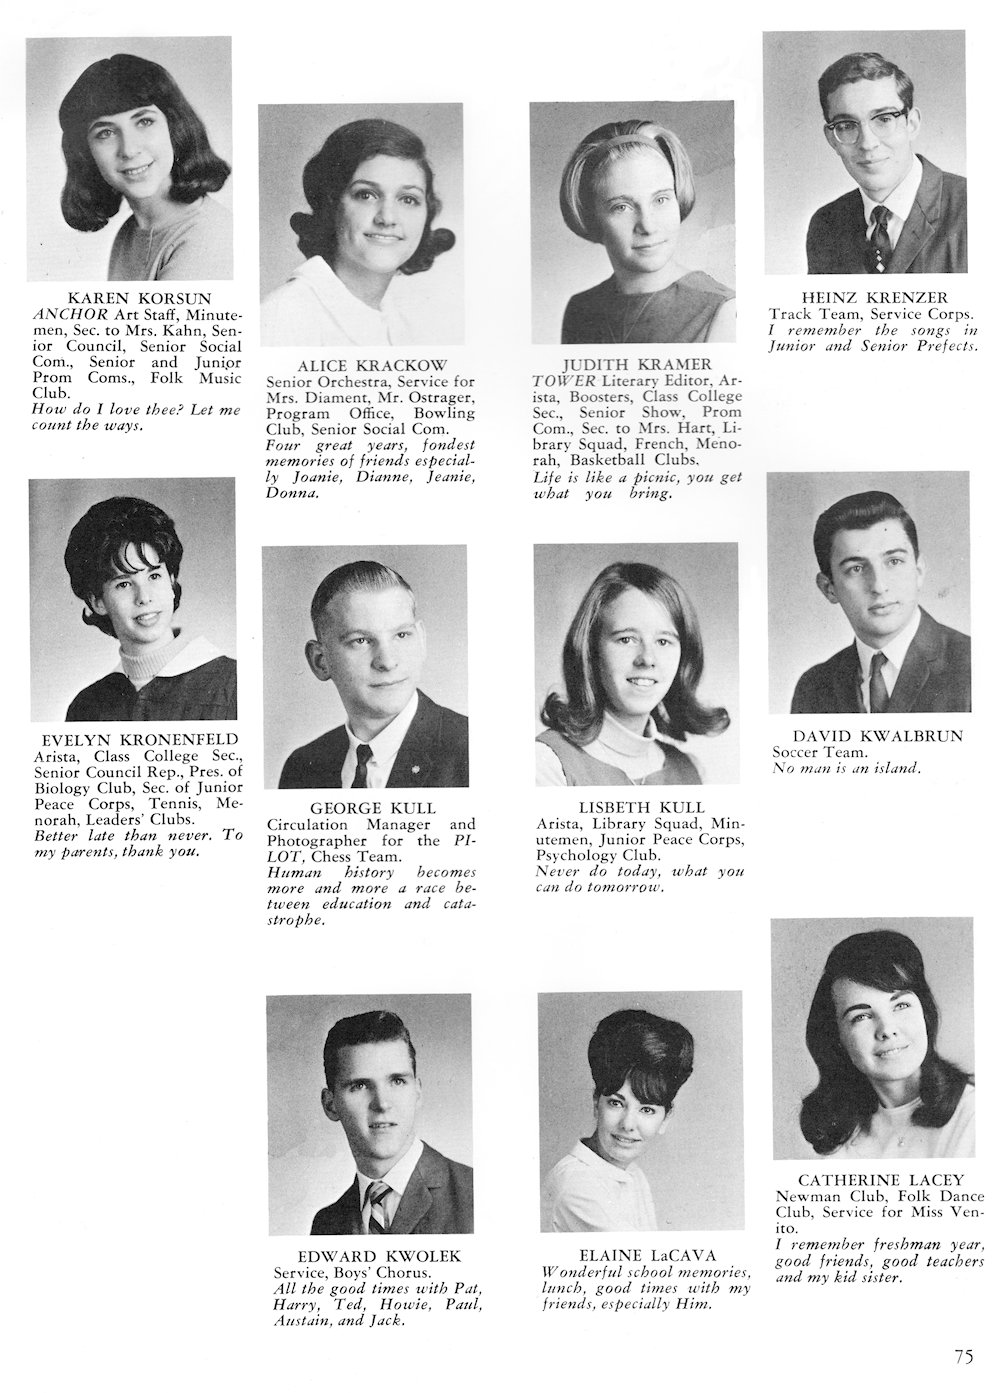 Korsun-Lacey page from Fort Hamilton High School 1965